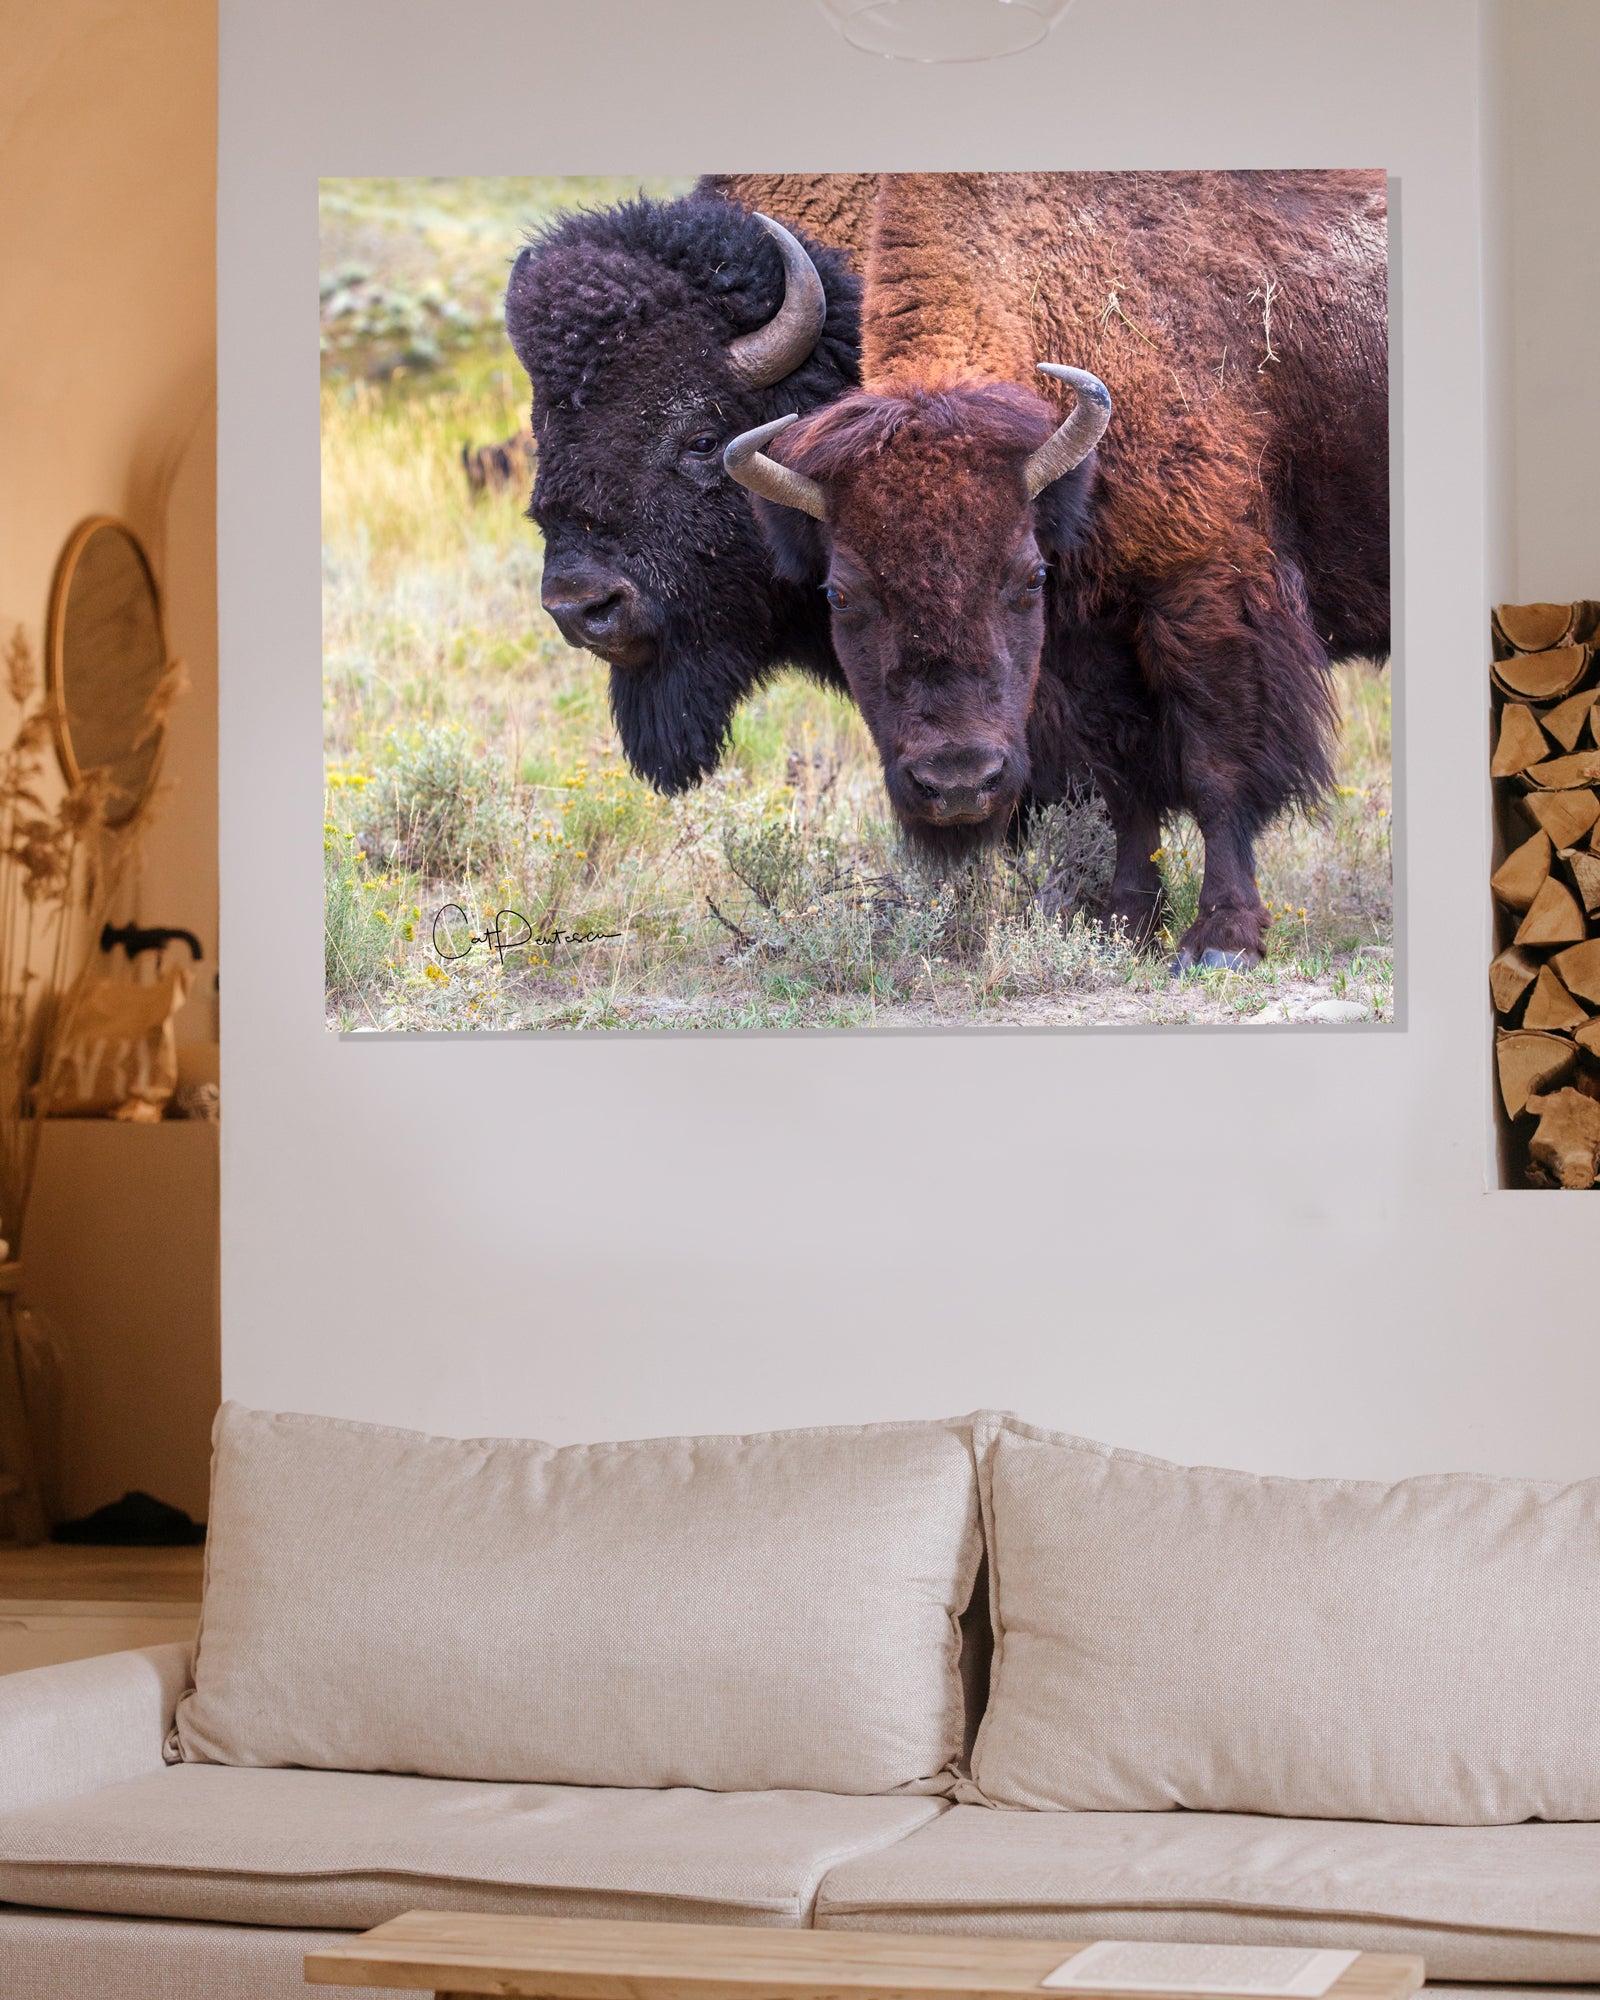 Happy Couple. on wall in casual home.  Close up portrait of bull and cow buffalo standing next to each other in the wild. Late summer in field of green grass, sagebrush golden flowers